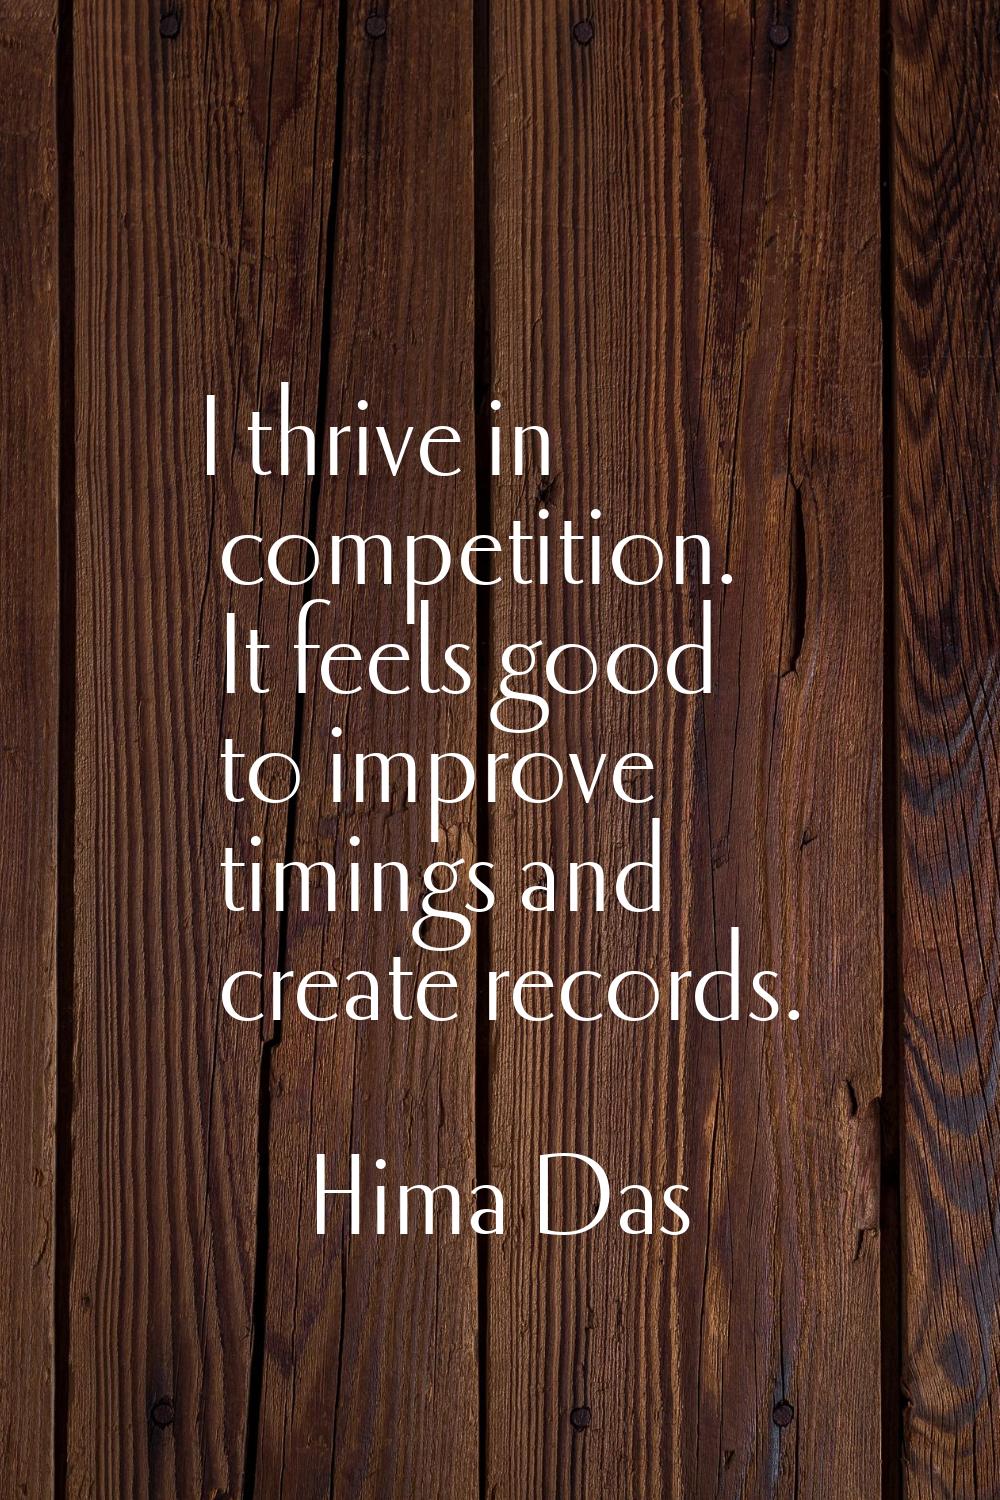 I thrive in competition. It feels good to improve timings and create records.